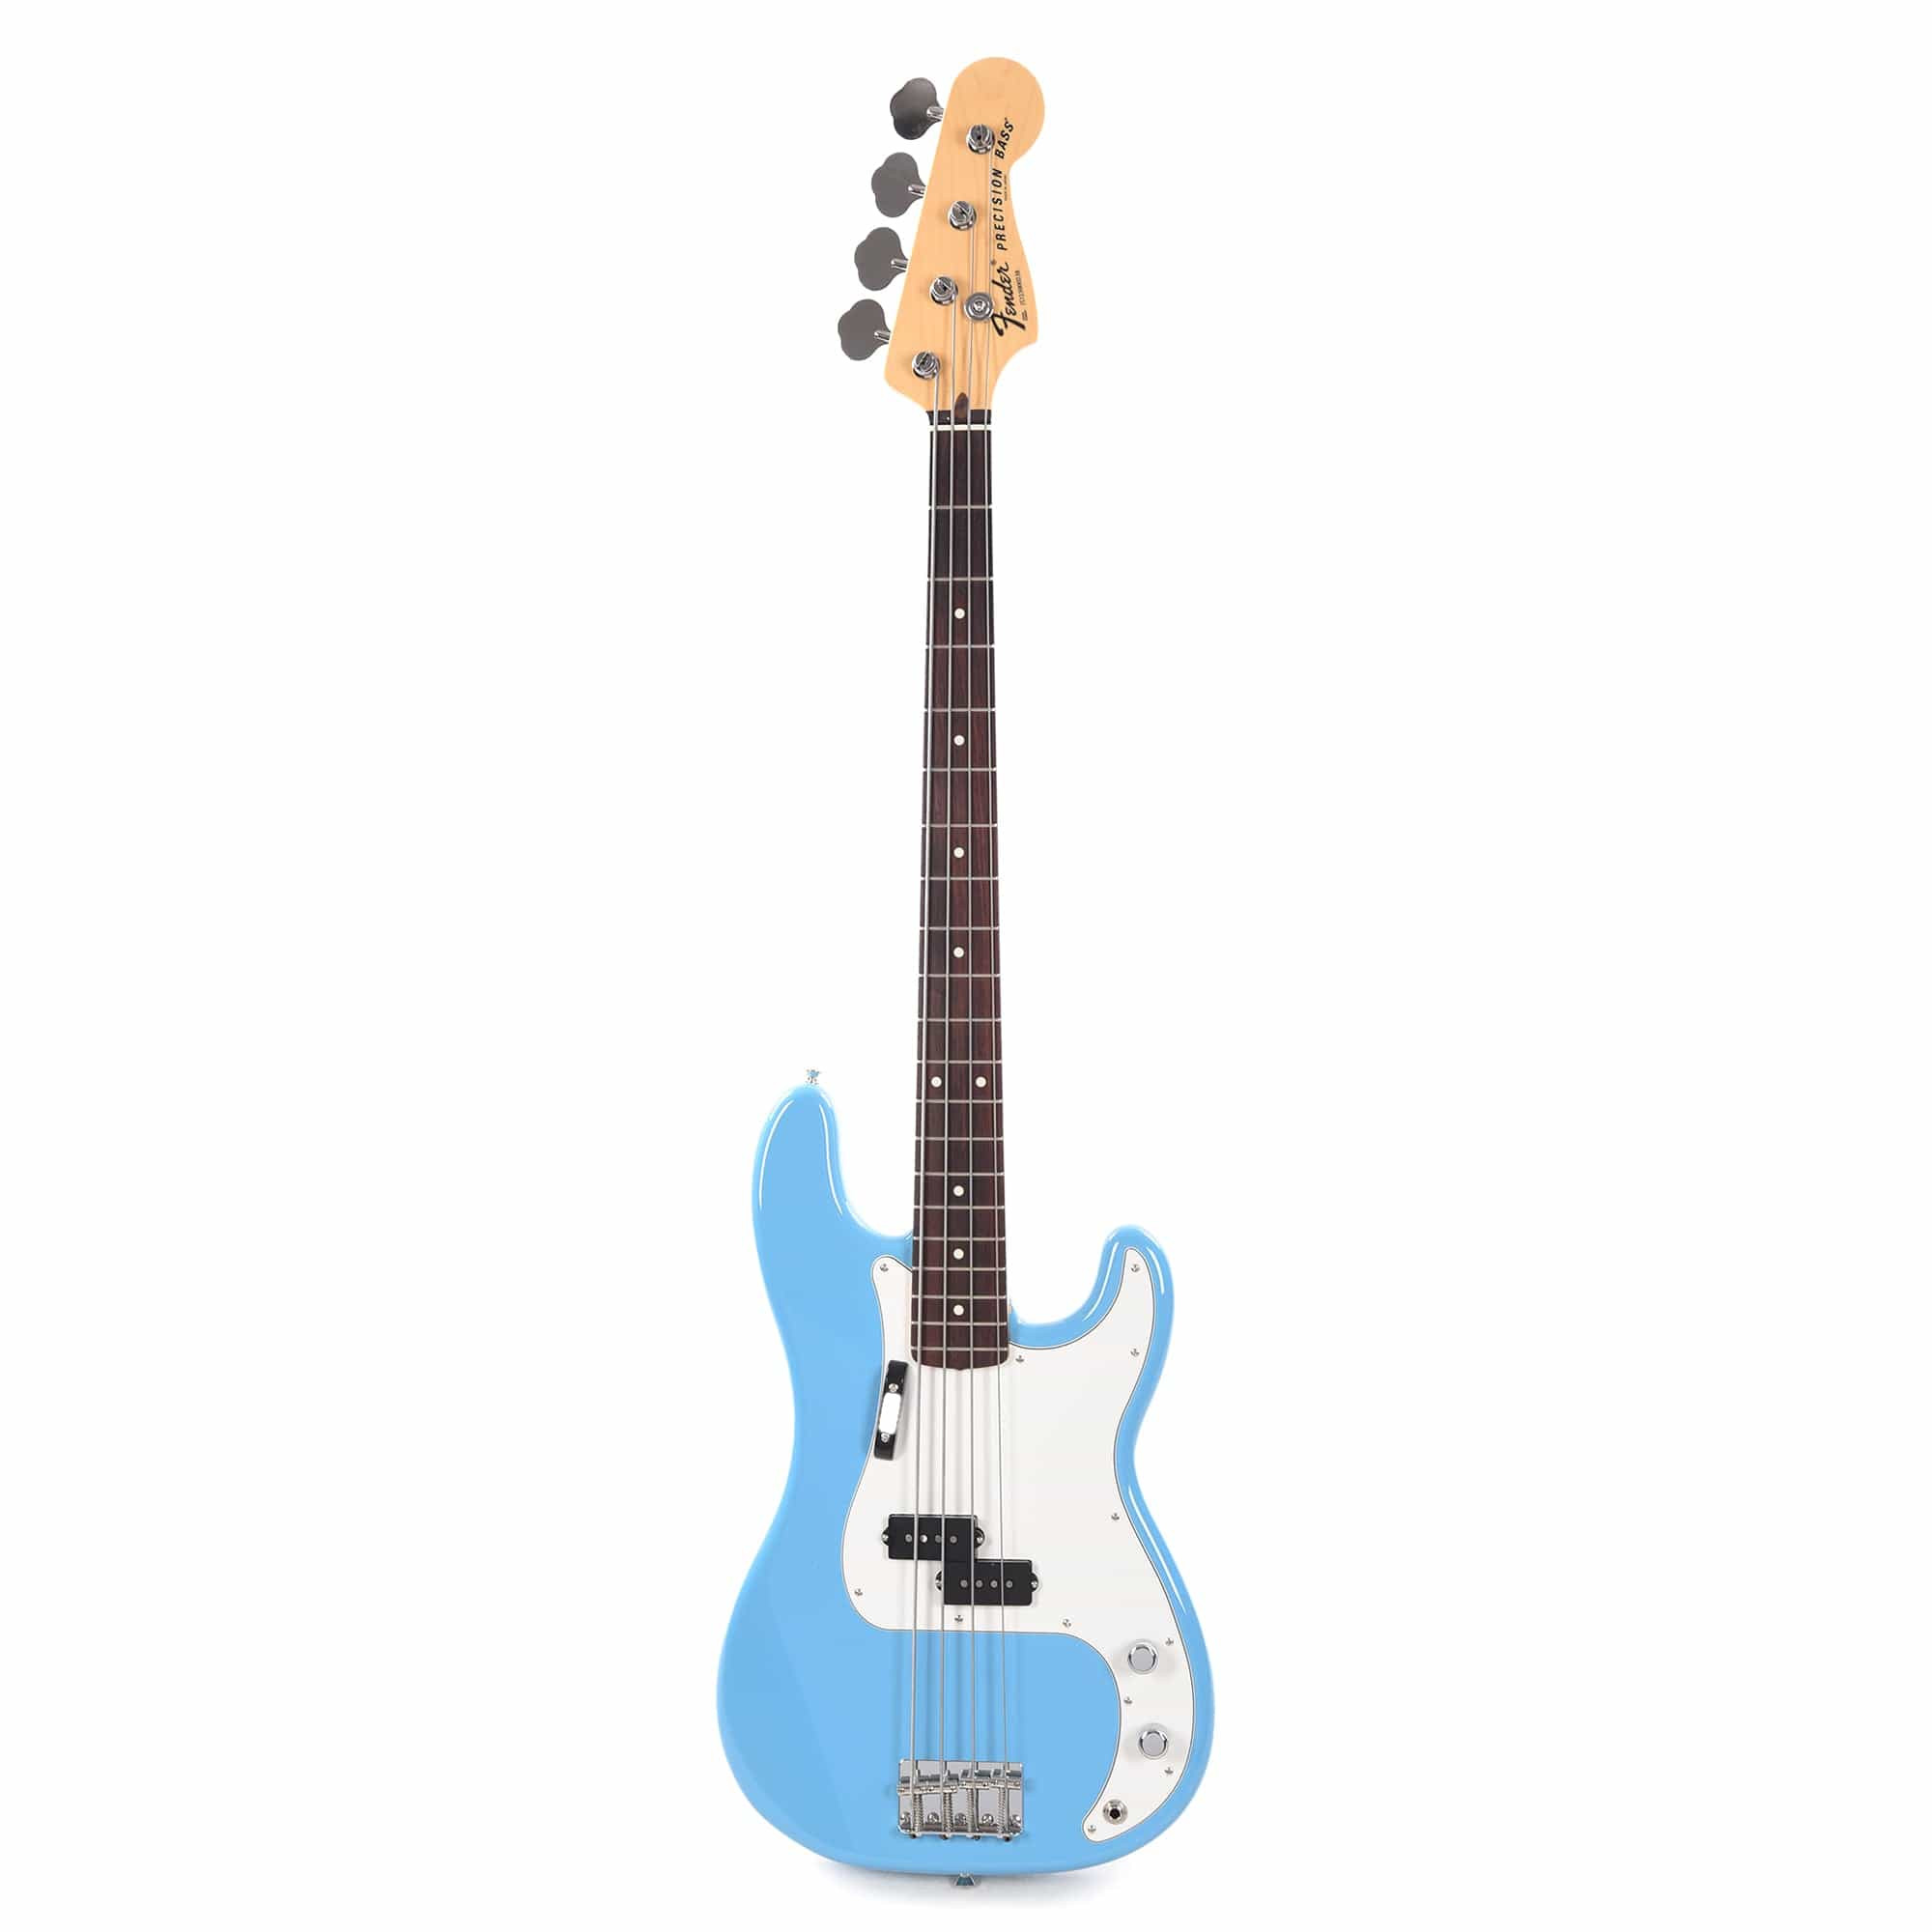 Fender Made in Japan Limited International Color Series Precision Bass Maui Blue Bass Guitars / 4-String